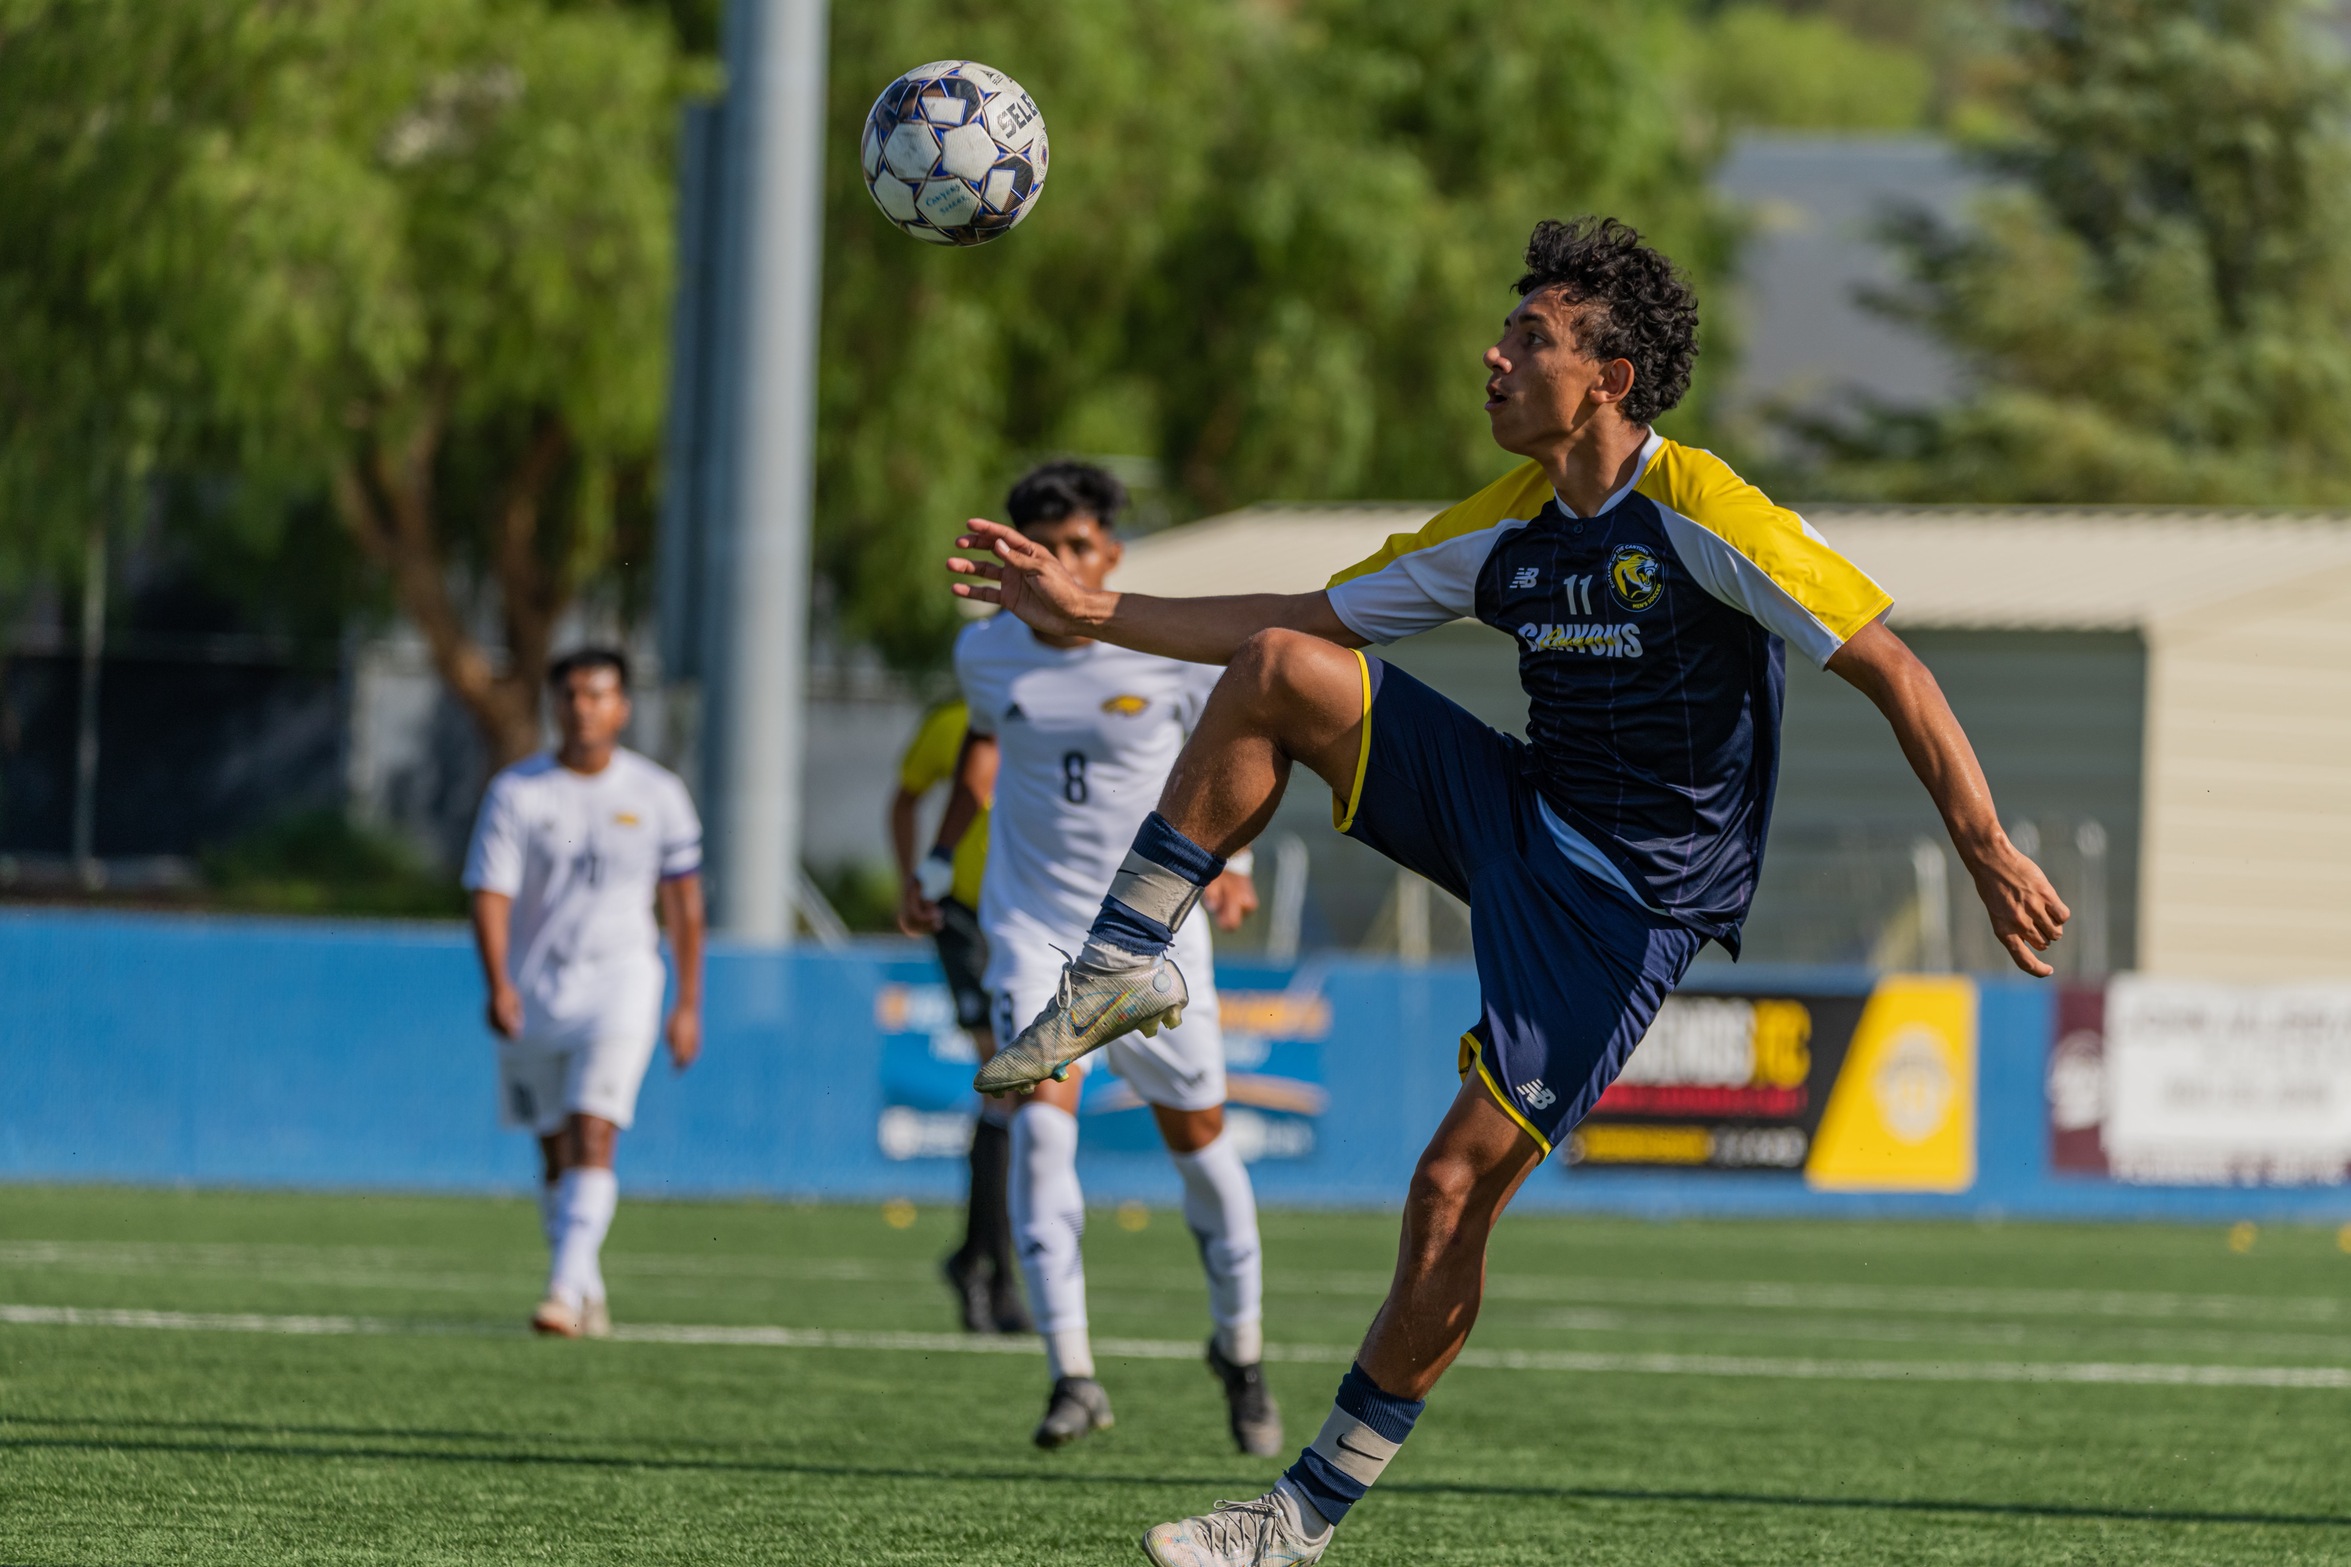 College of the Canyons men's soccer vs. West Hills Lemoore College on Sept. 12, 2022.